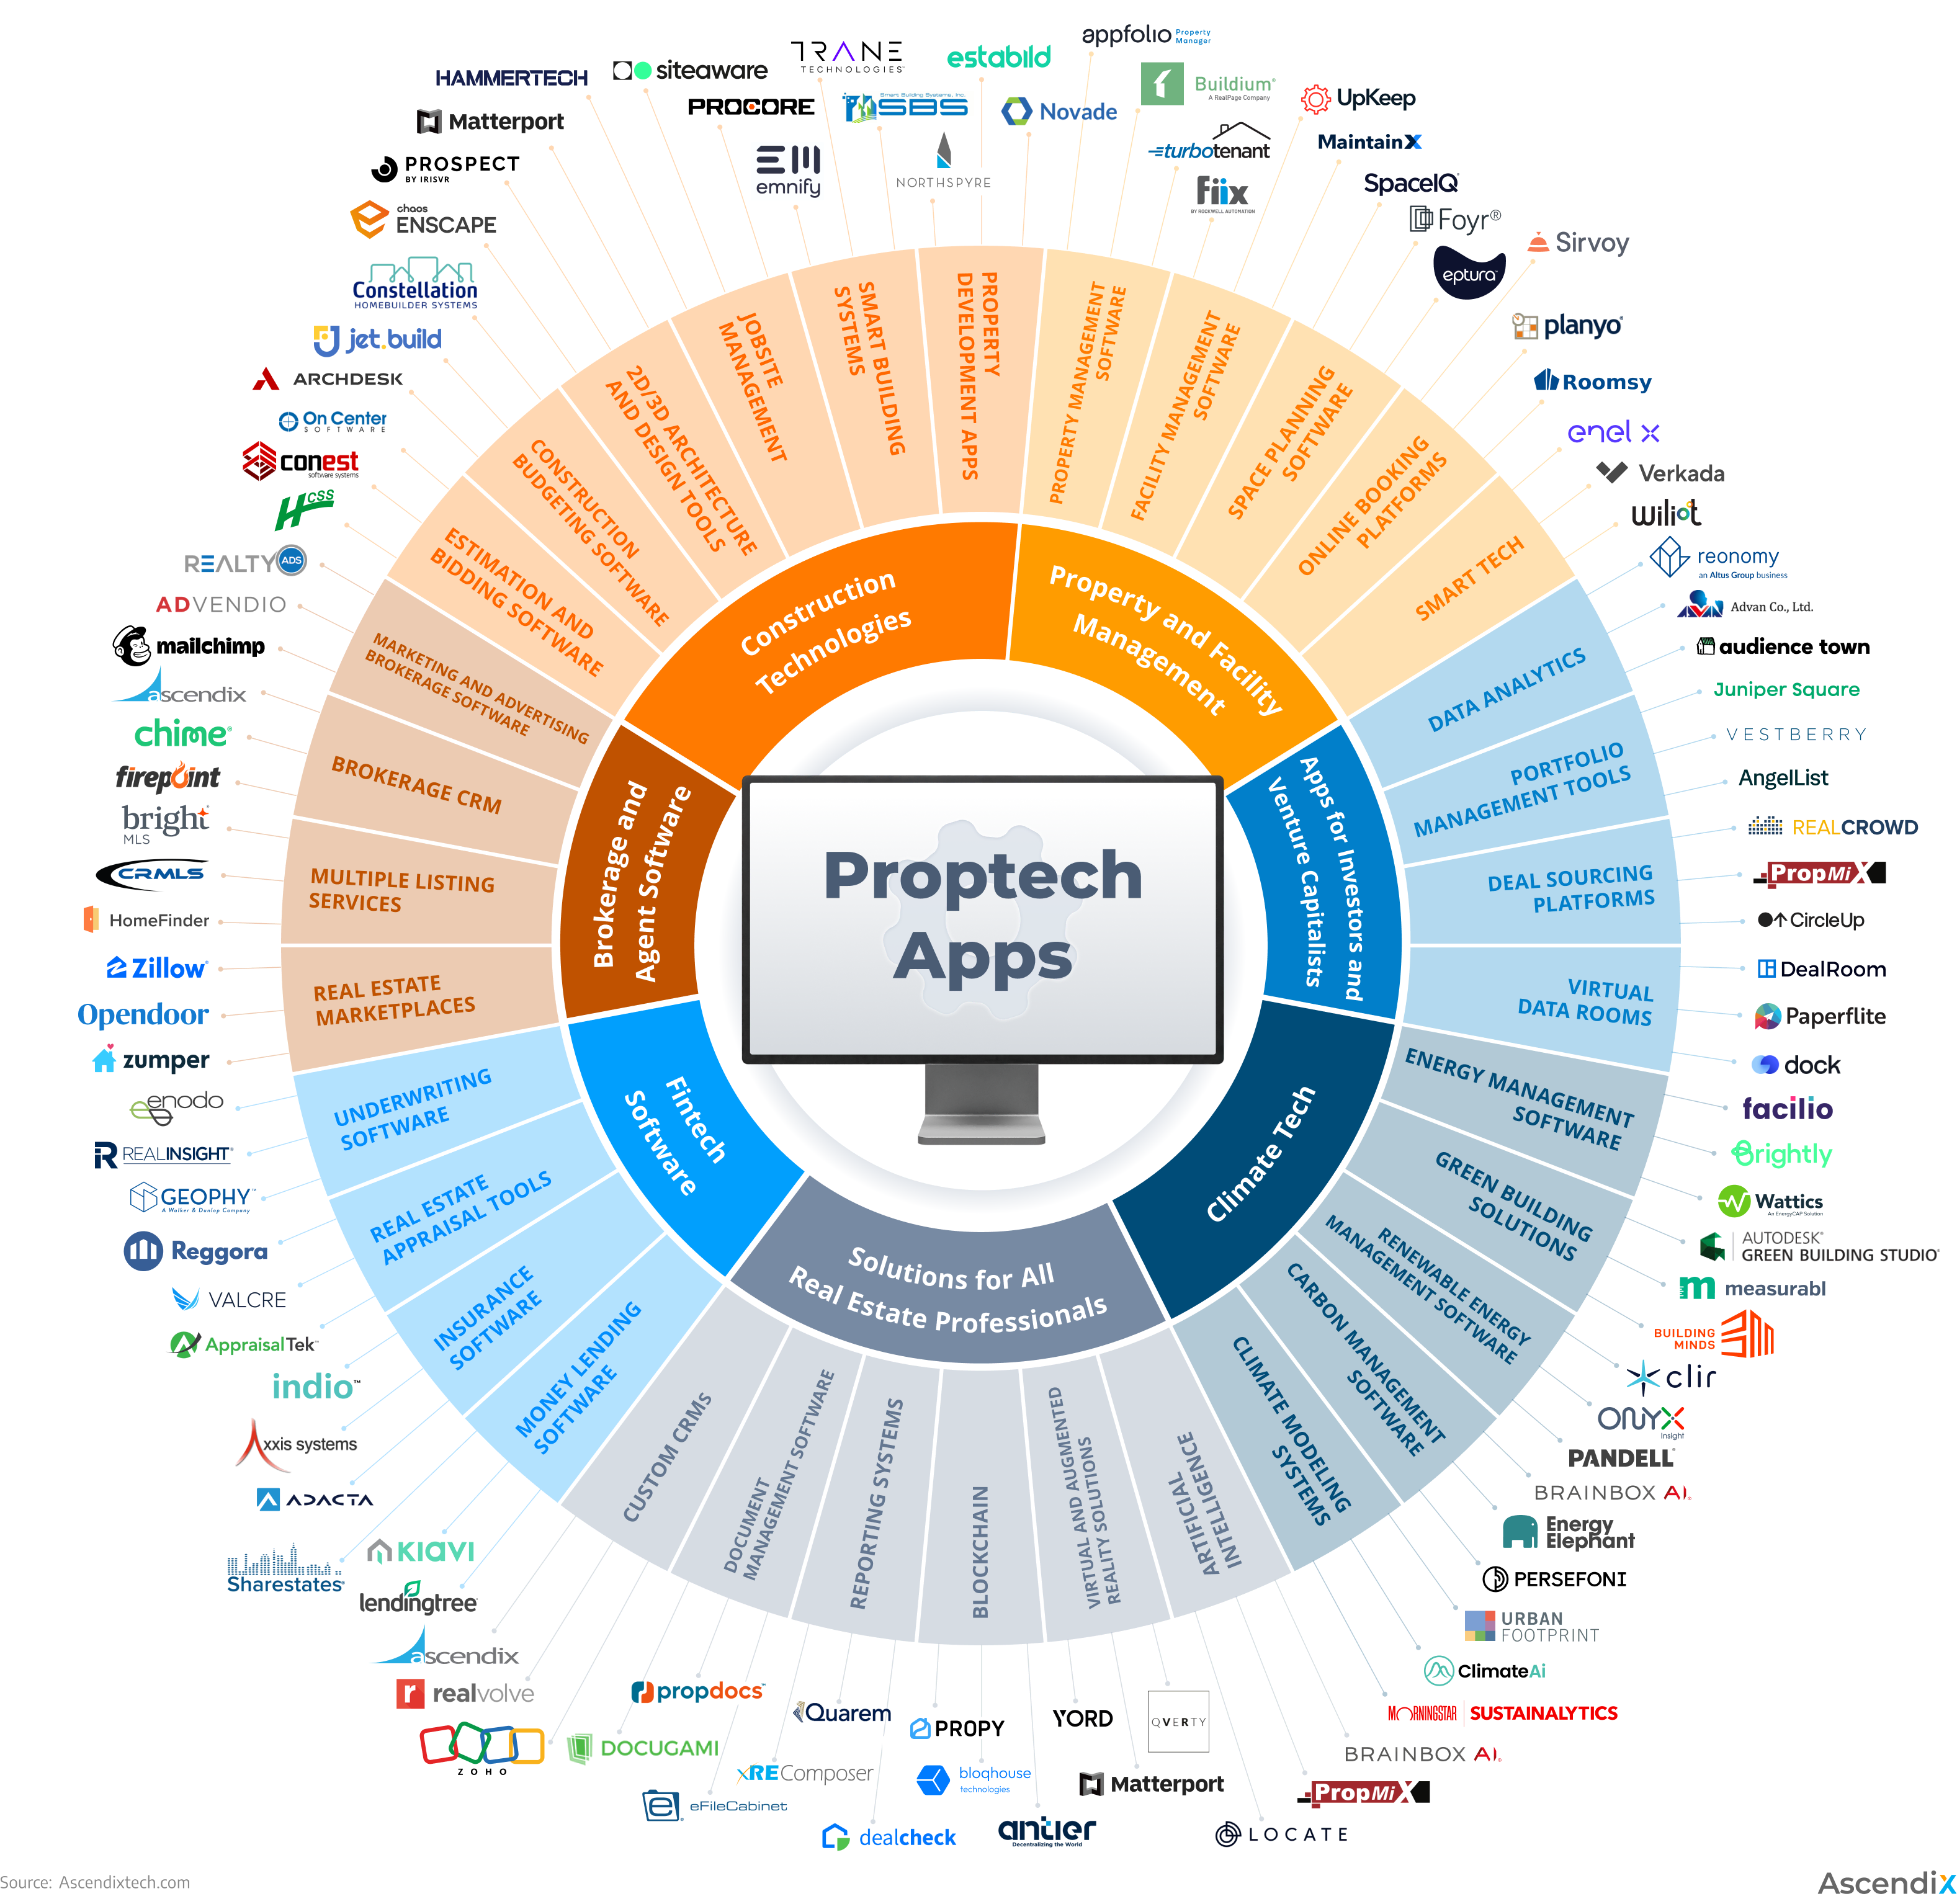 Types of Proptech Apps 